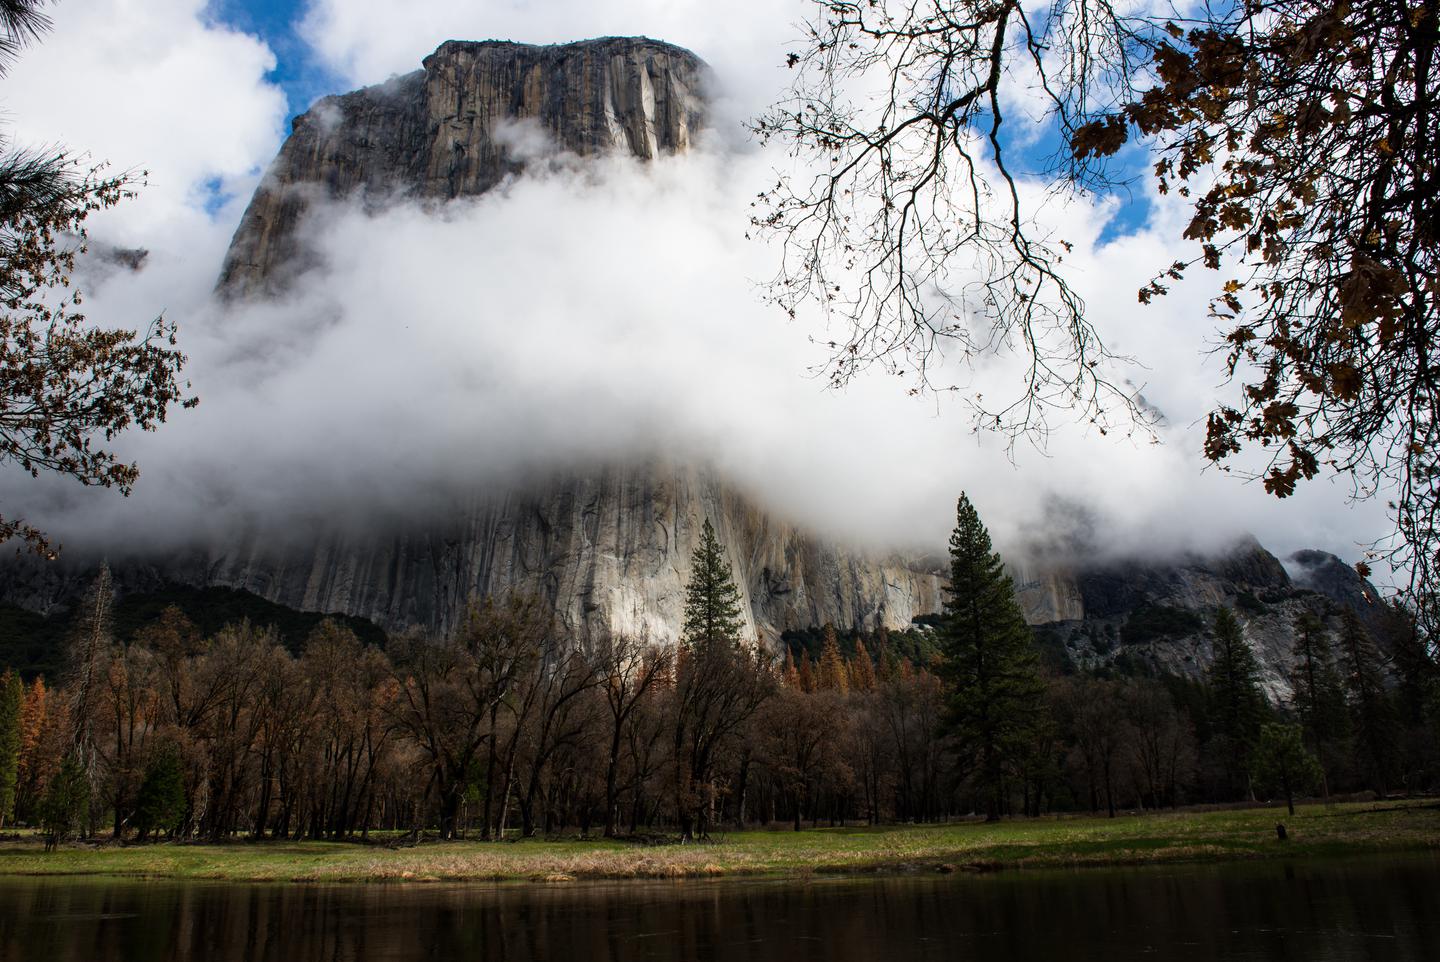 View of a large rock monolith partially covered with a cloud, with a river and trees in the foregroundEl Capitan in Yosemite Valley is blanketed by clouds as they roll through the Valley.